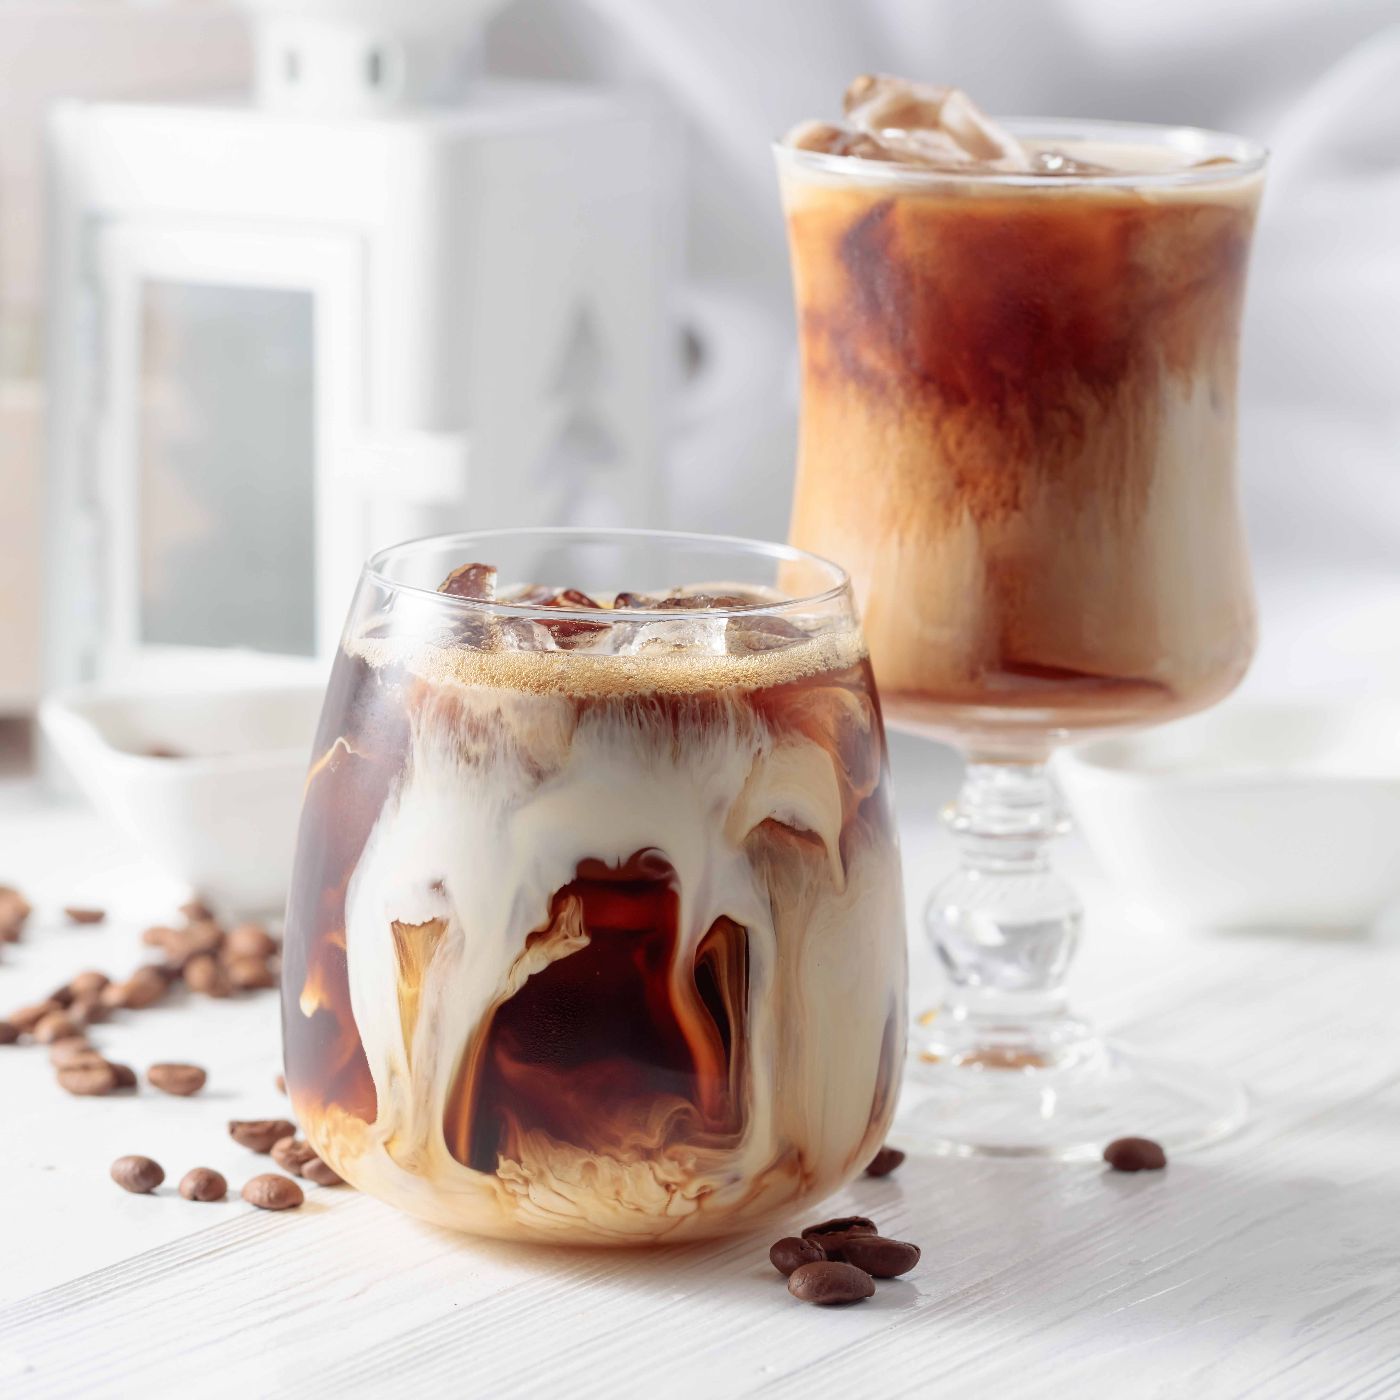 Iced-coffee-with-cream-and-natural-ice.-1367483097_5773x8660 square.jpeg